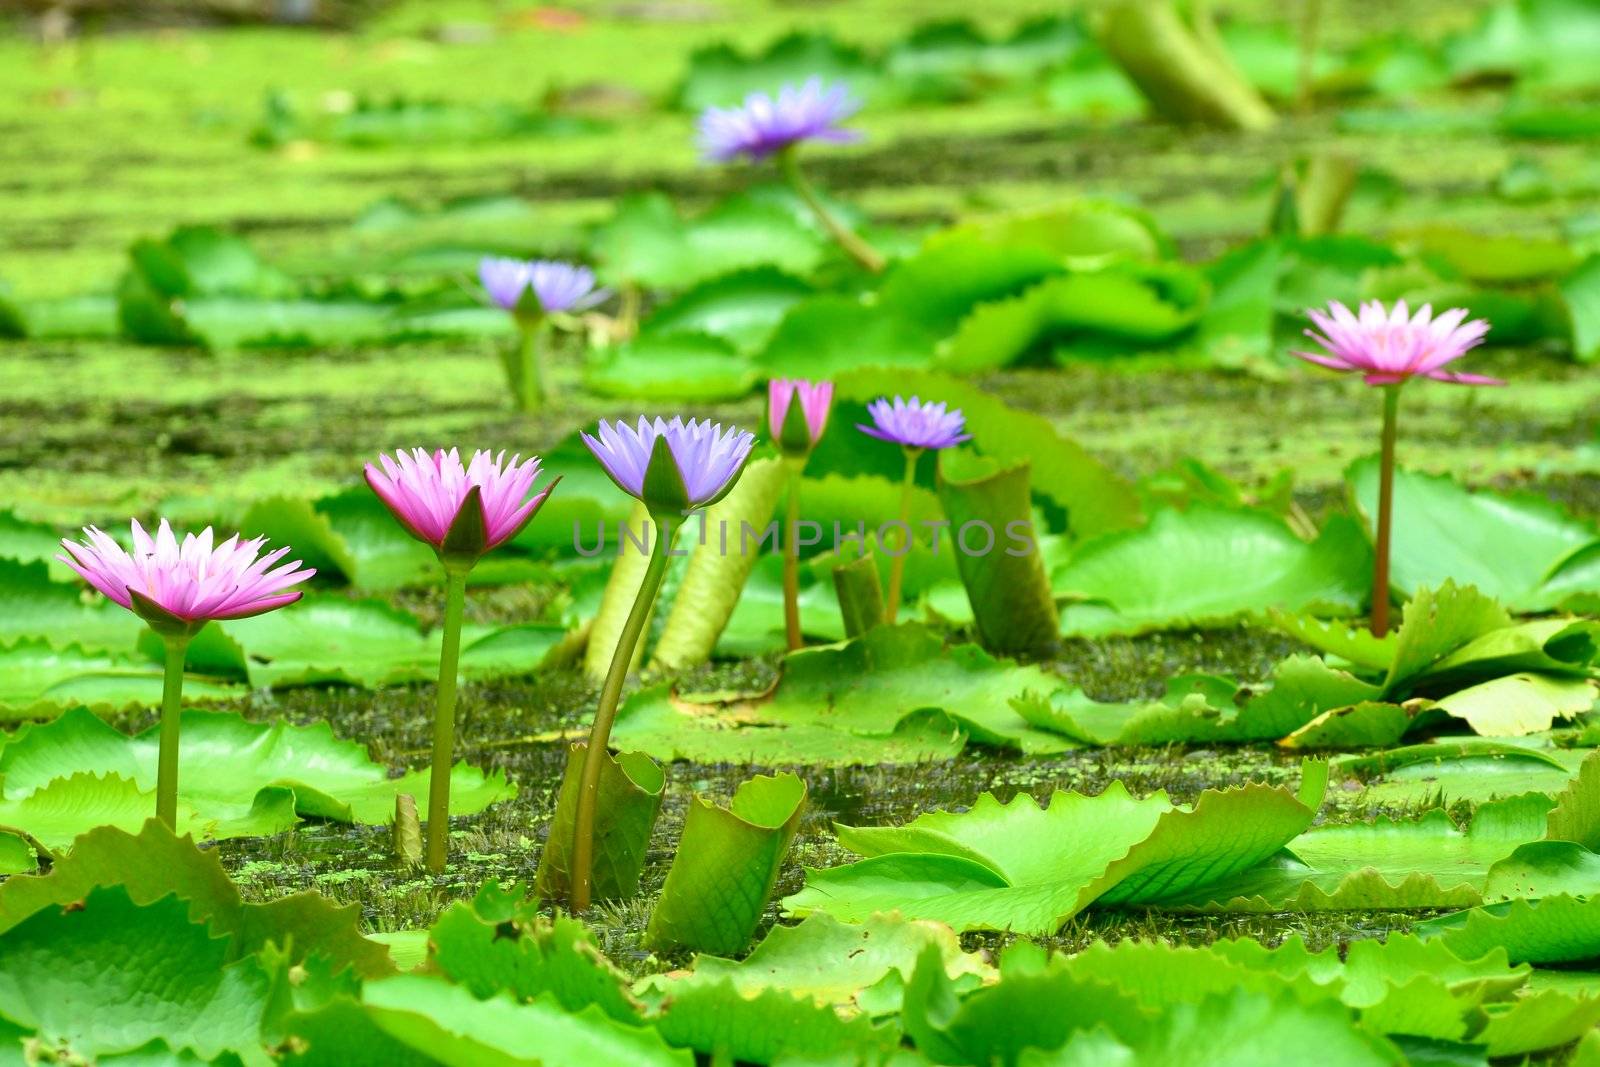 pink lily in pond